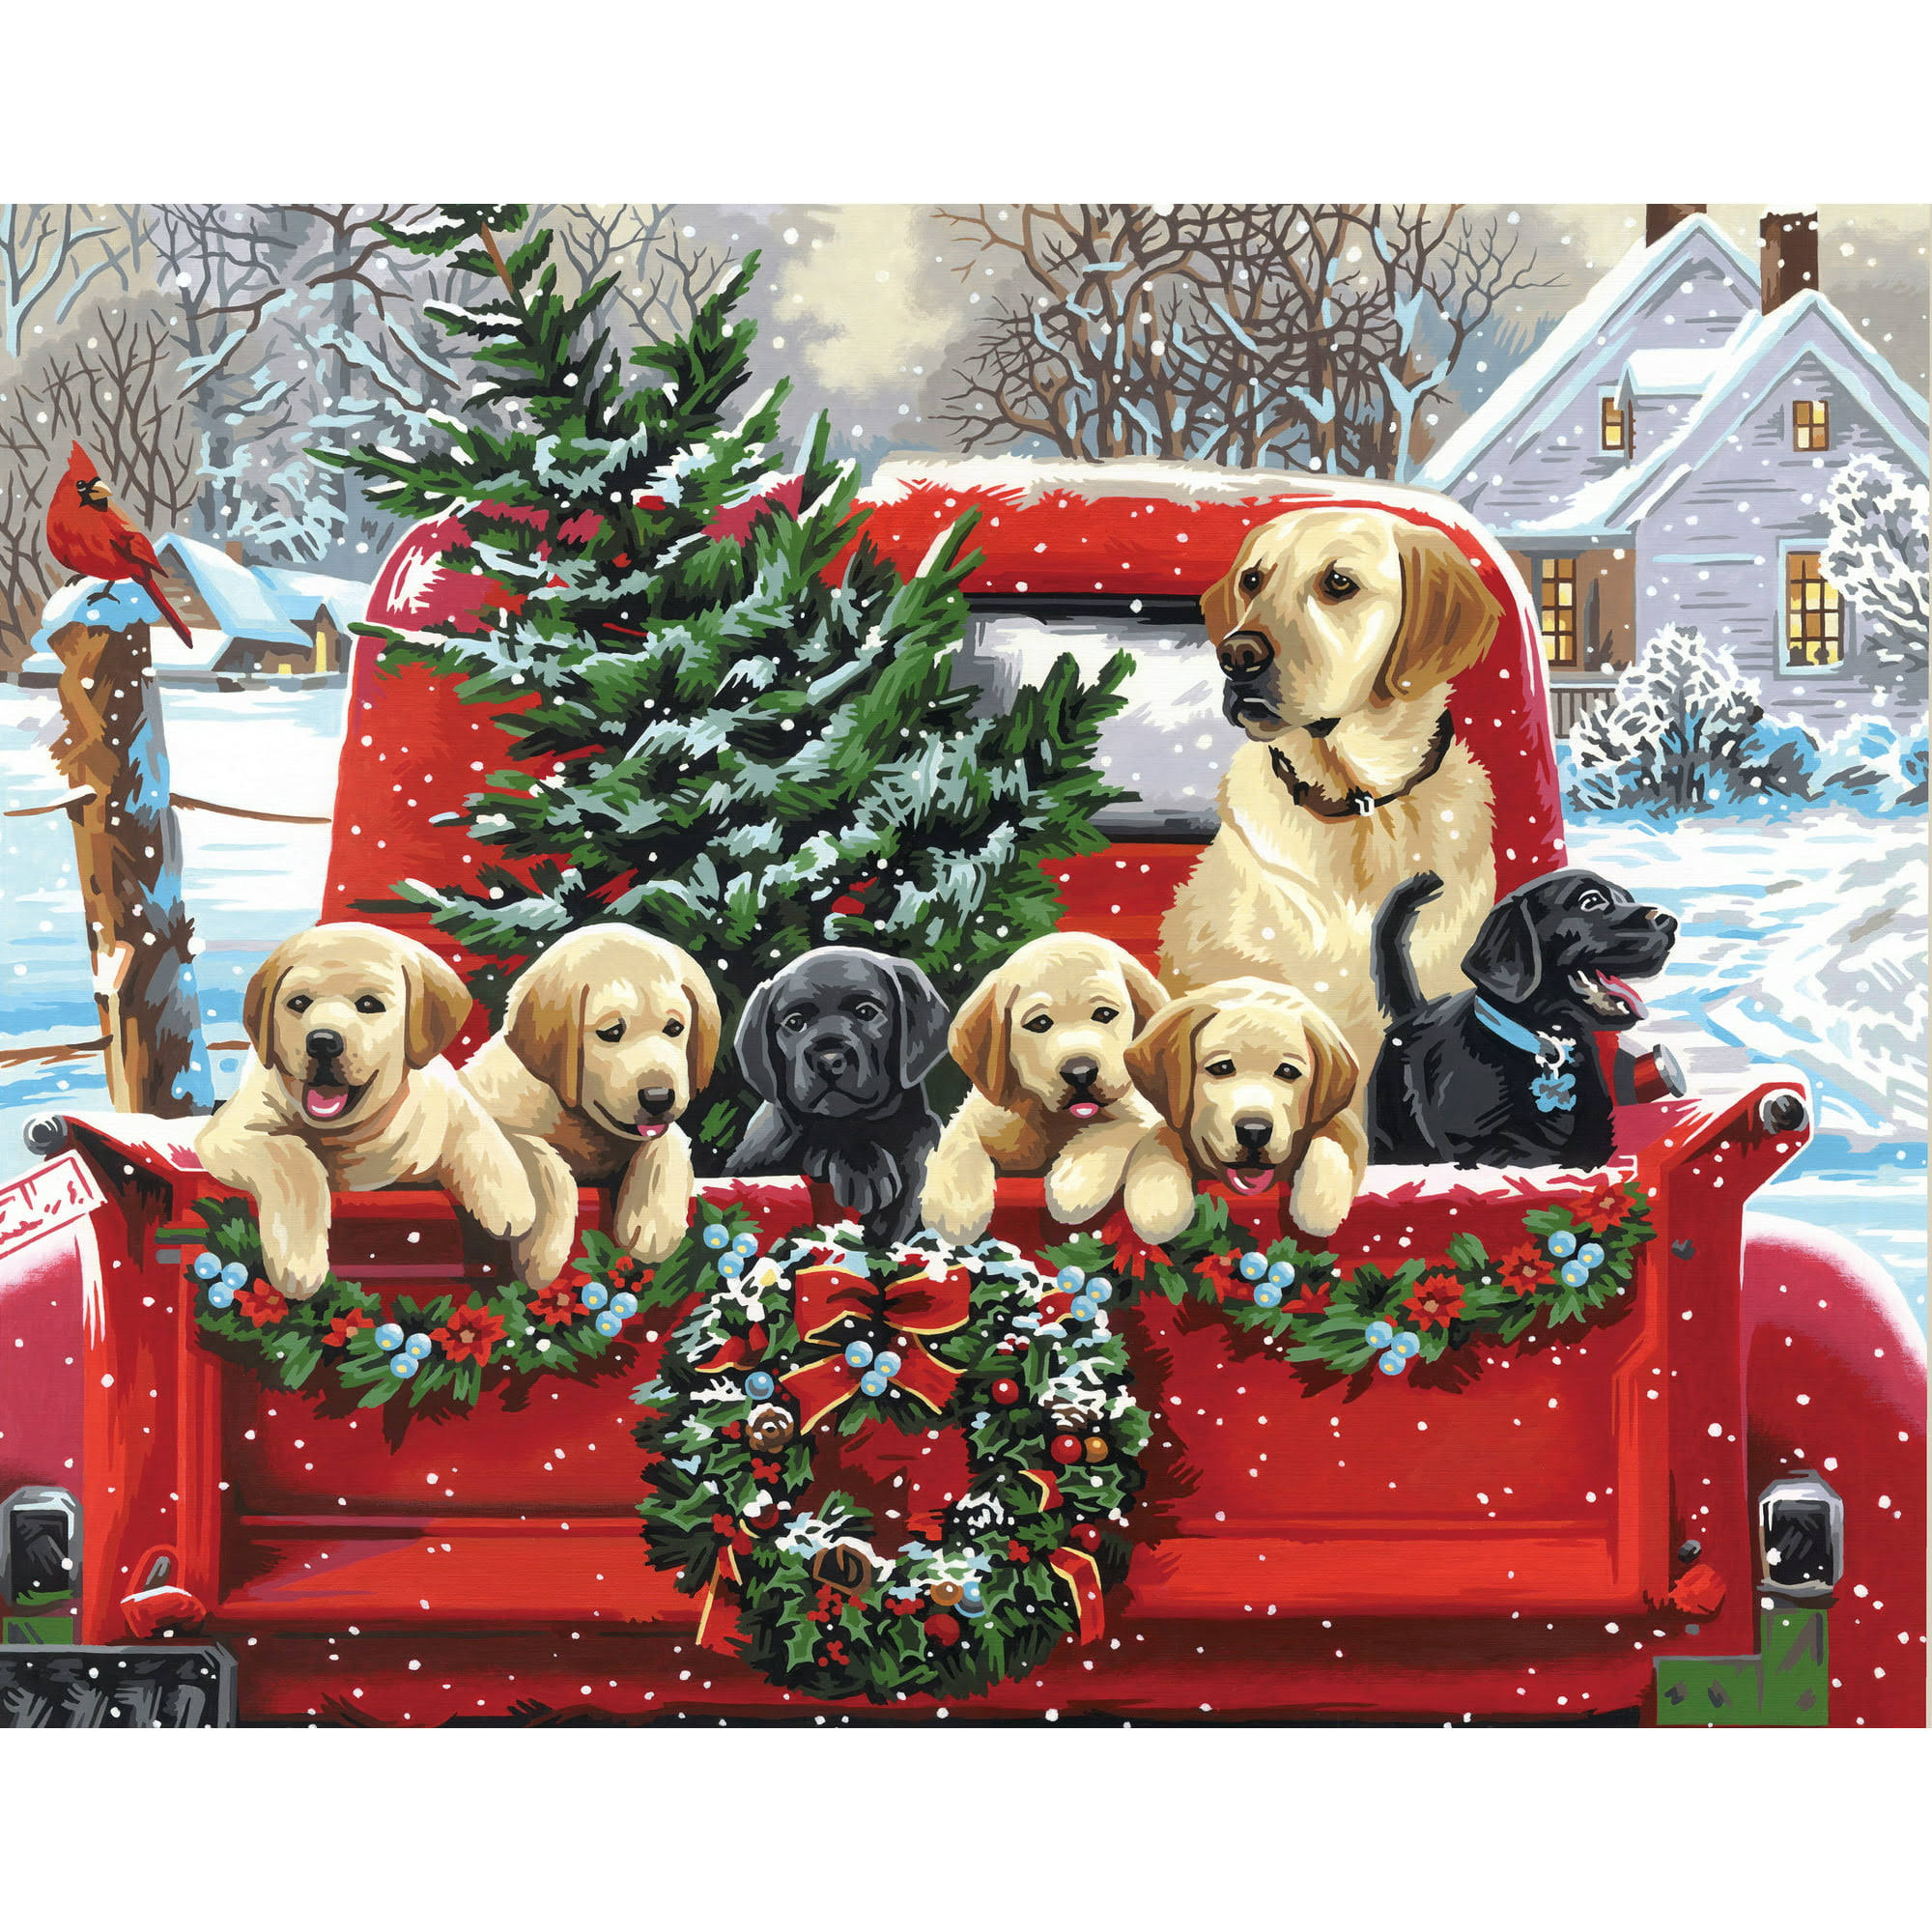 Paint Works Paint by Number Kit 20"x16" Holiday Puppy Truck